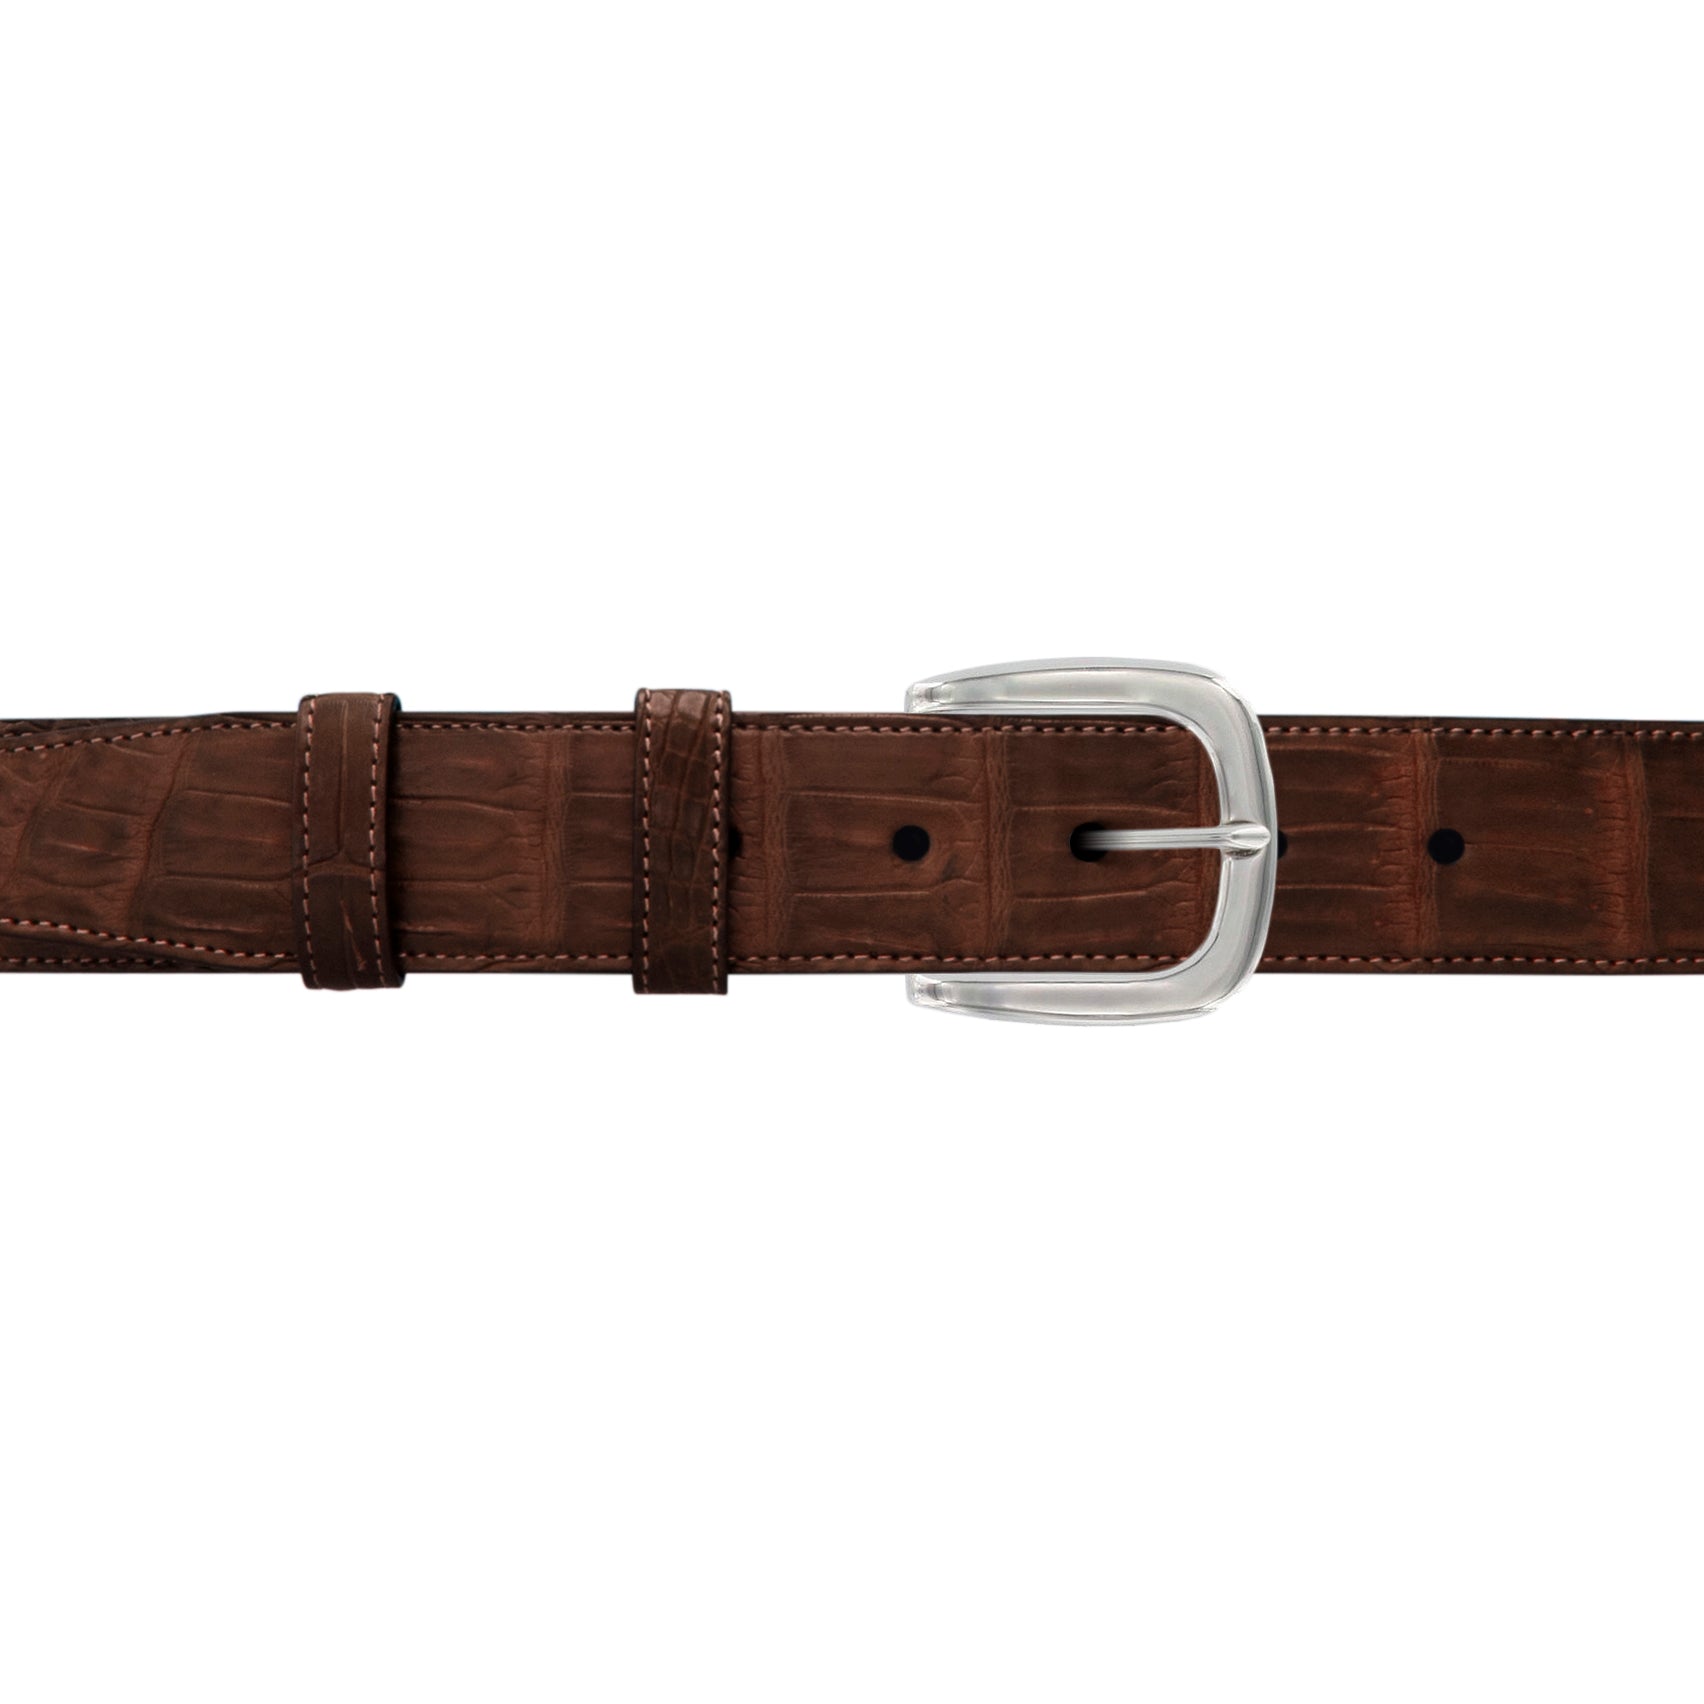 1 1/2" Cognac Classic Belt with Oxford Cocktail Buckle in Polished Nickel